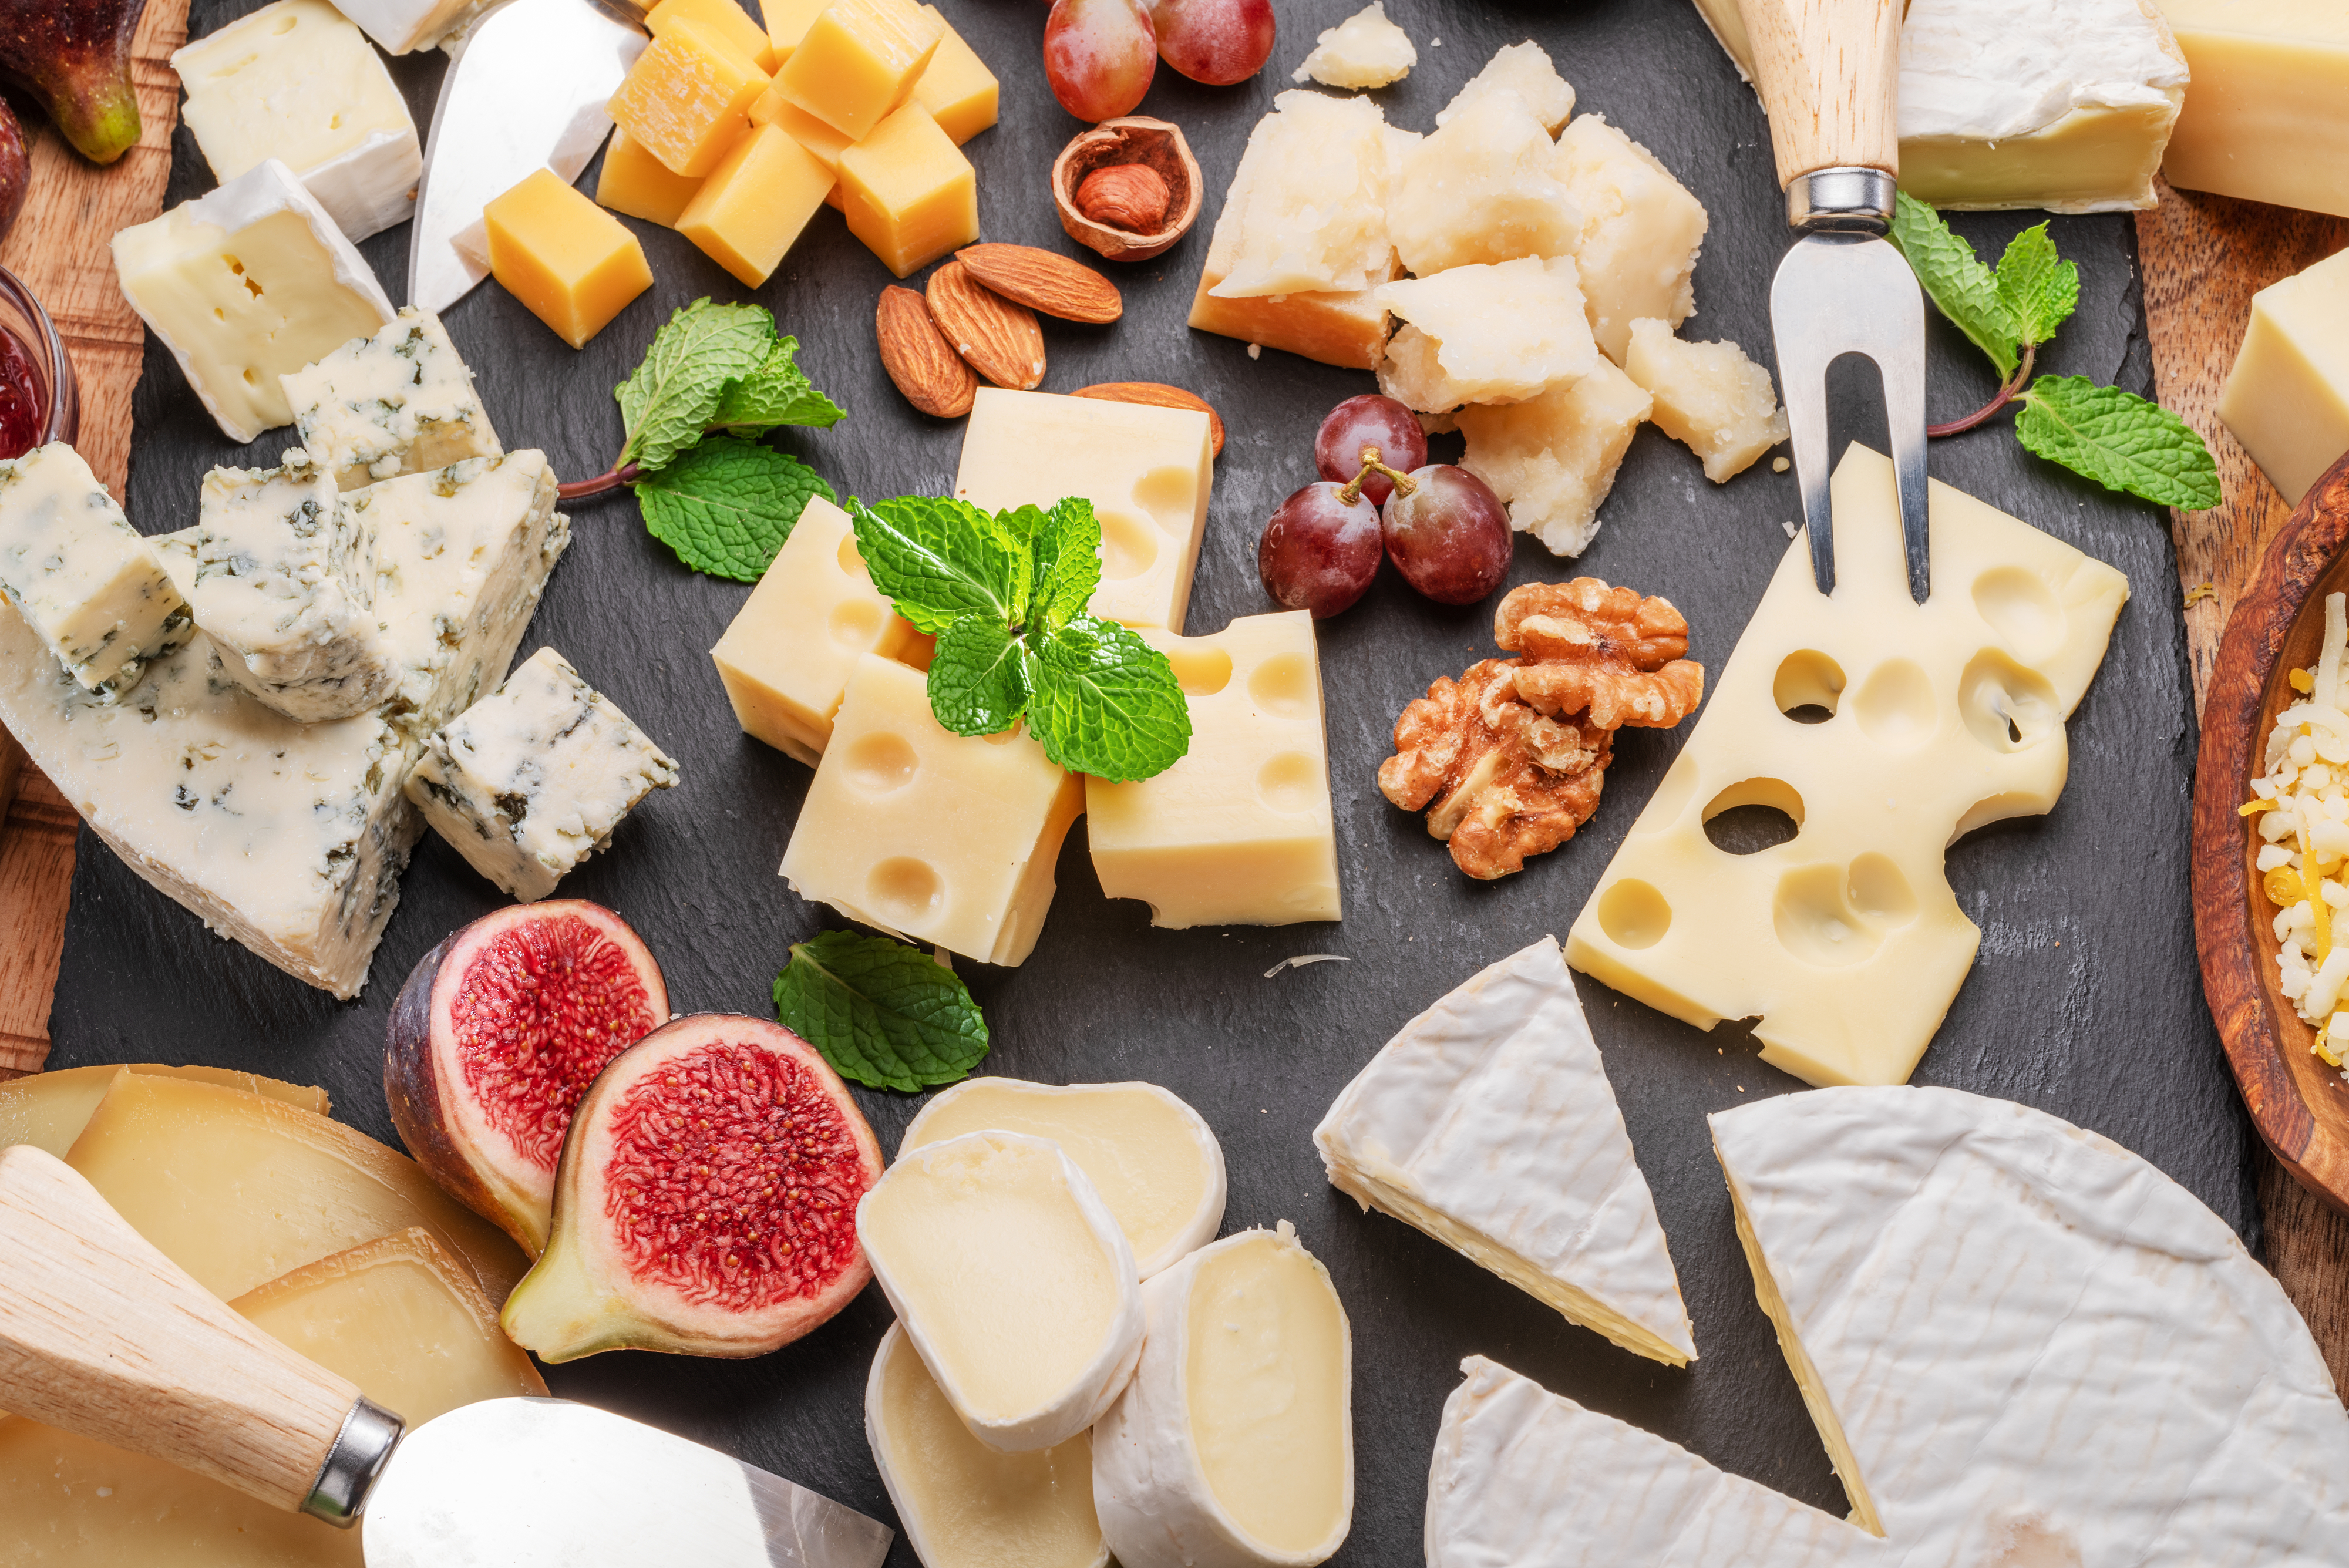 Assorted cheeses, nuts, and figs on a wooden board with cheese knives